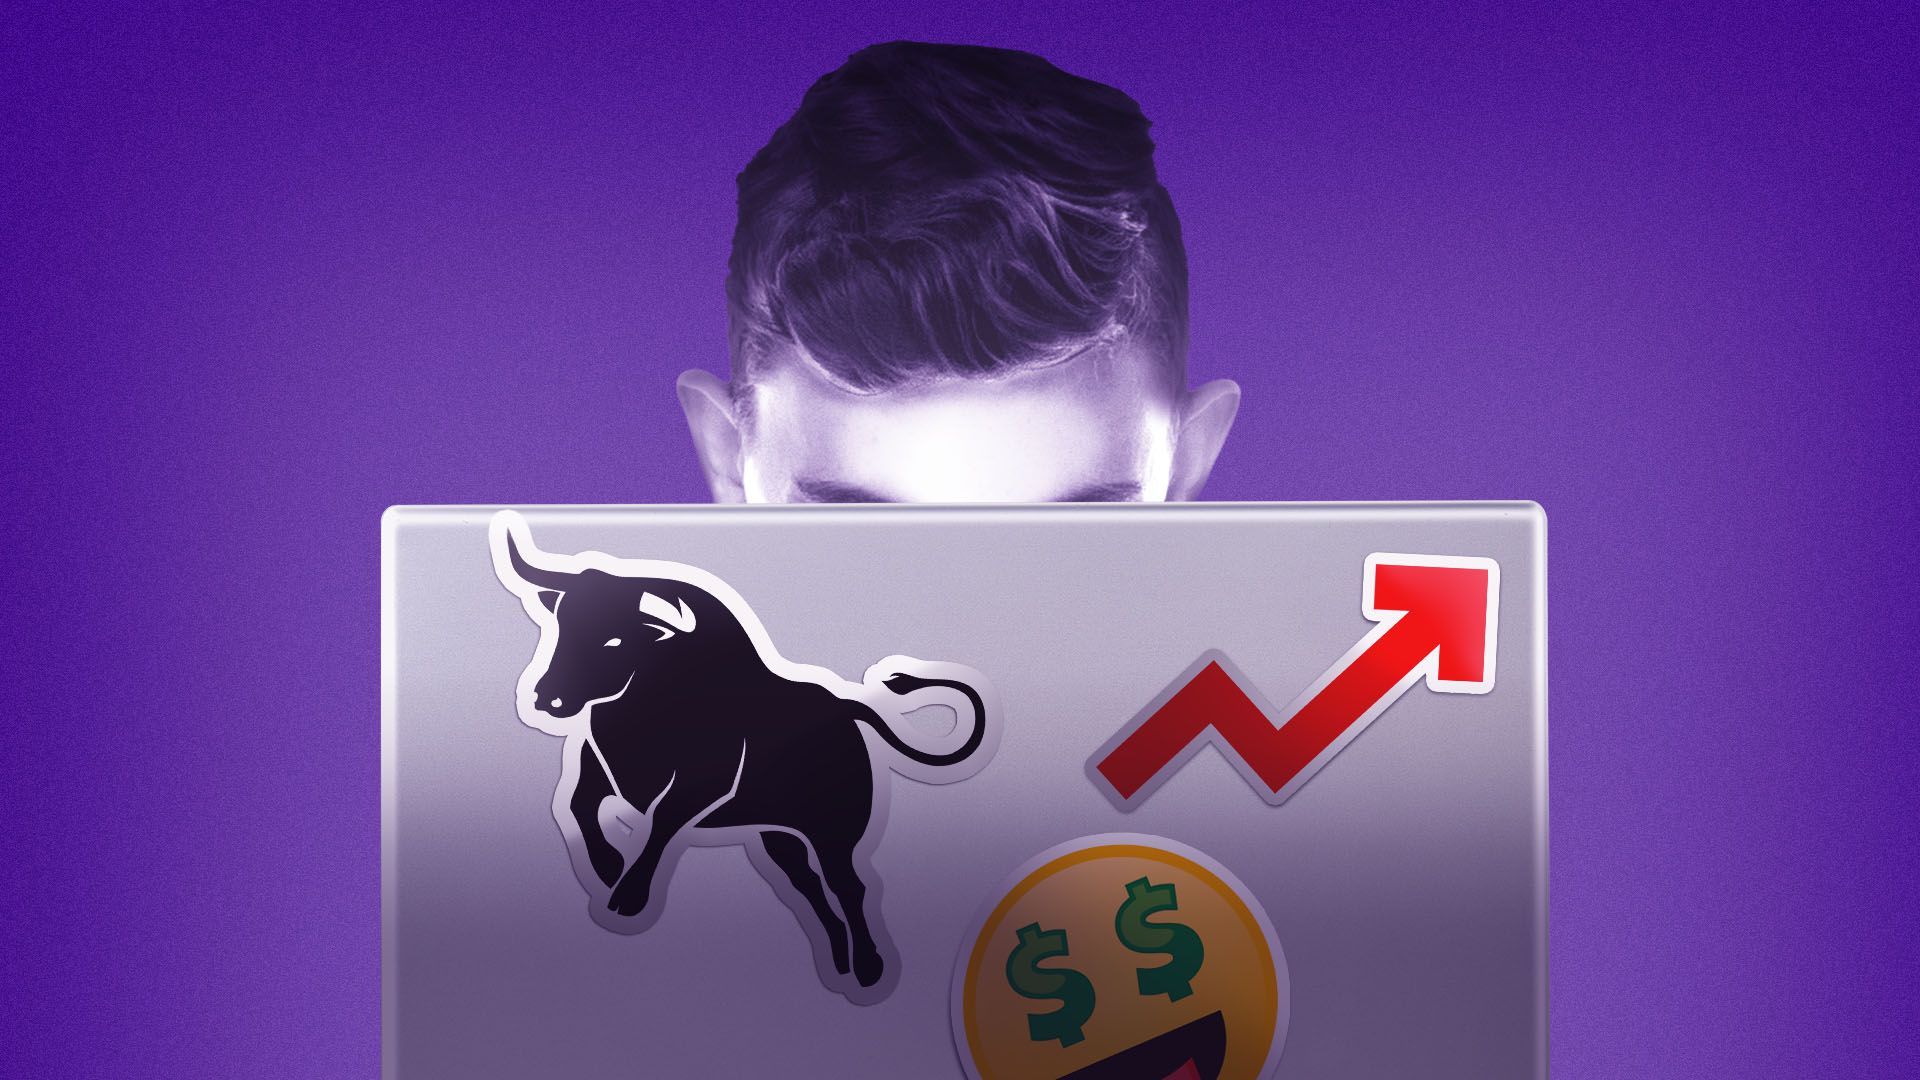 Illustration of a teenager on a laptop covered in wall-street related decals including a bull, a trend line, and an emoji with dollar sign eyes.